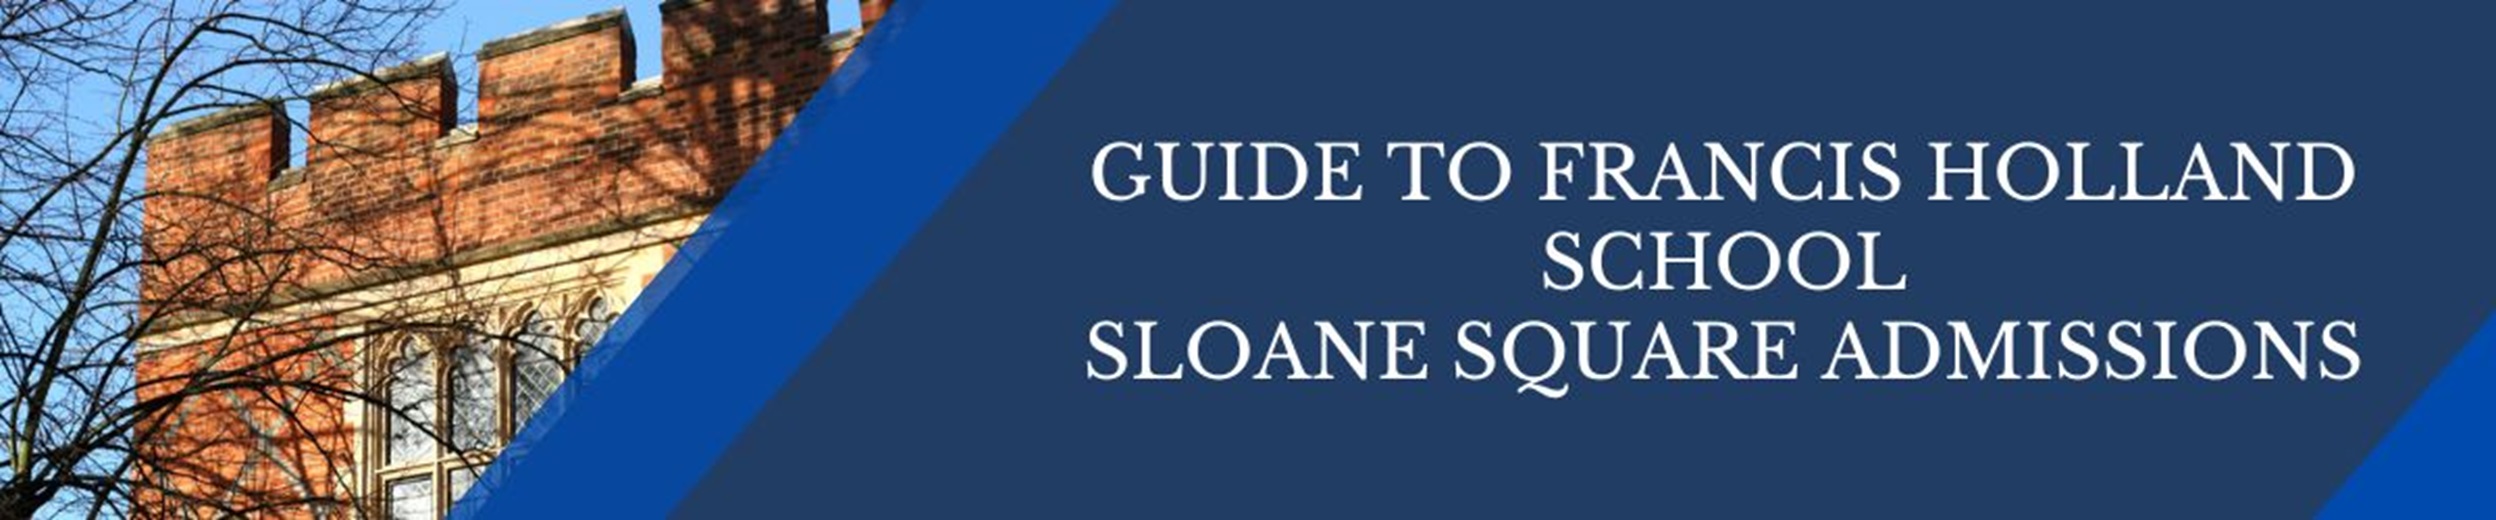 A Guide to Francis Holland School Sloane Square Admissions